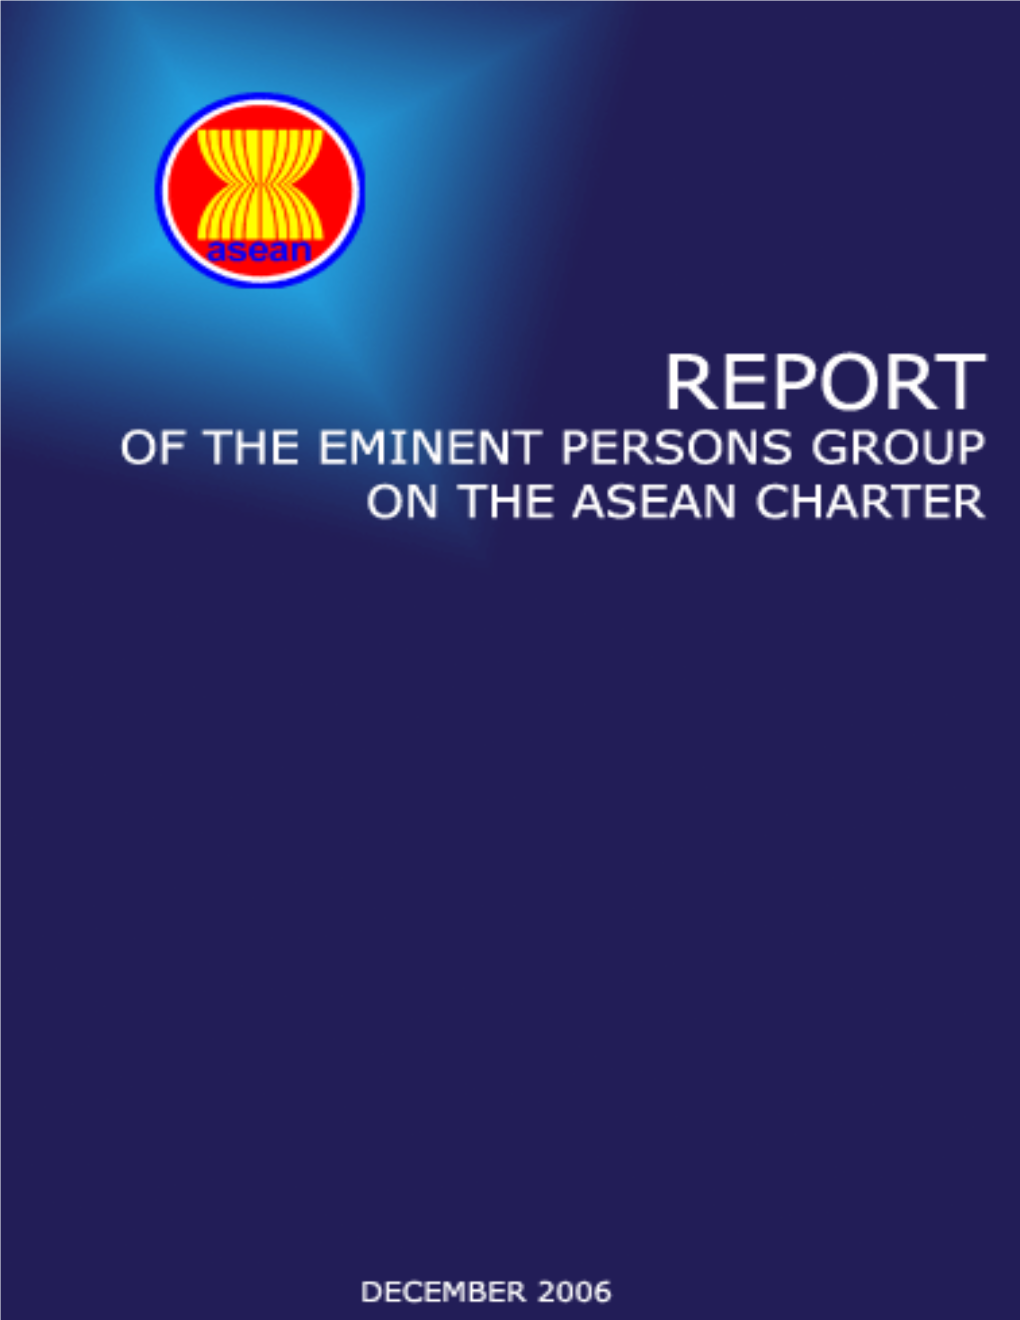 Report of the Eminent Persons Group (Epg) on the Asean Charter